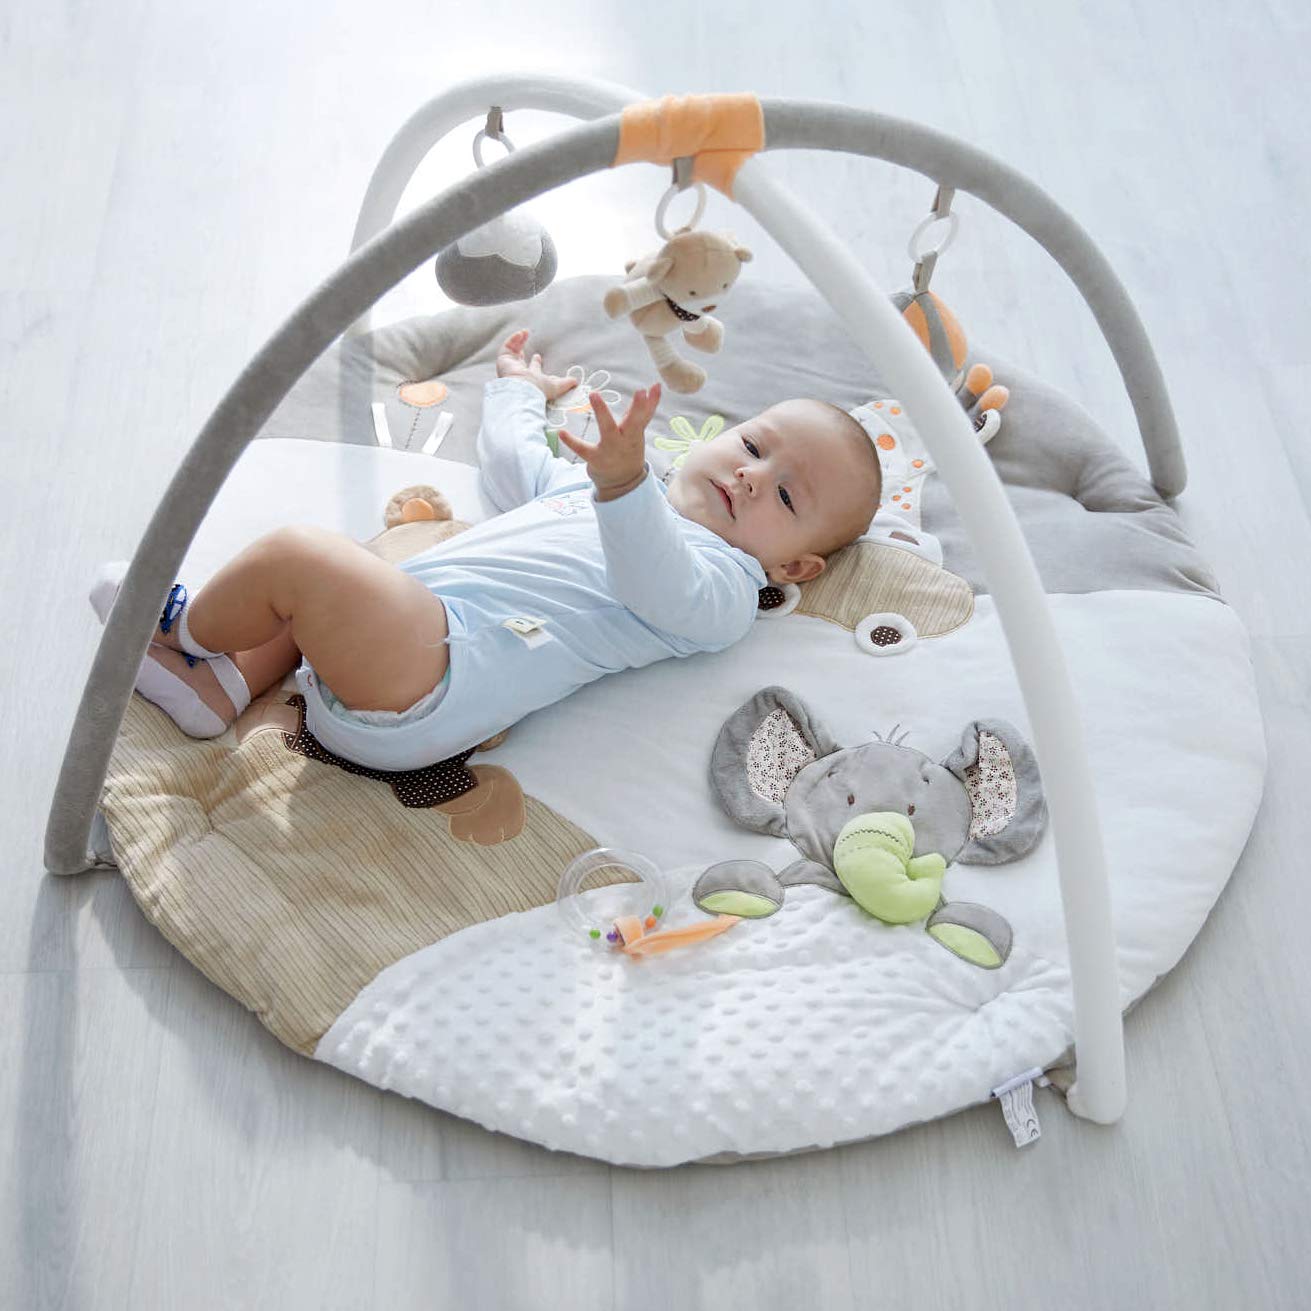 MiniDream Jumbo Baby Play Gym, Playmat for Baby with Three Detachable Toys, Music, Rattle and Baby Safe Mirror, Baby Sensory Tool Padded with Machine Washable Soft Velvet for Infants and Newborn